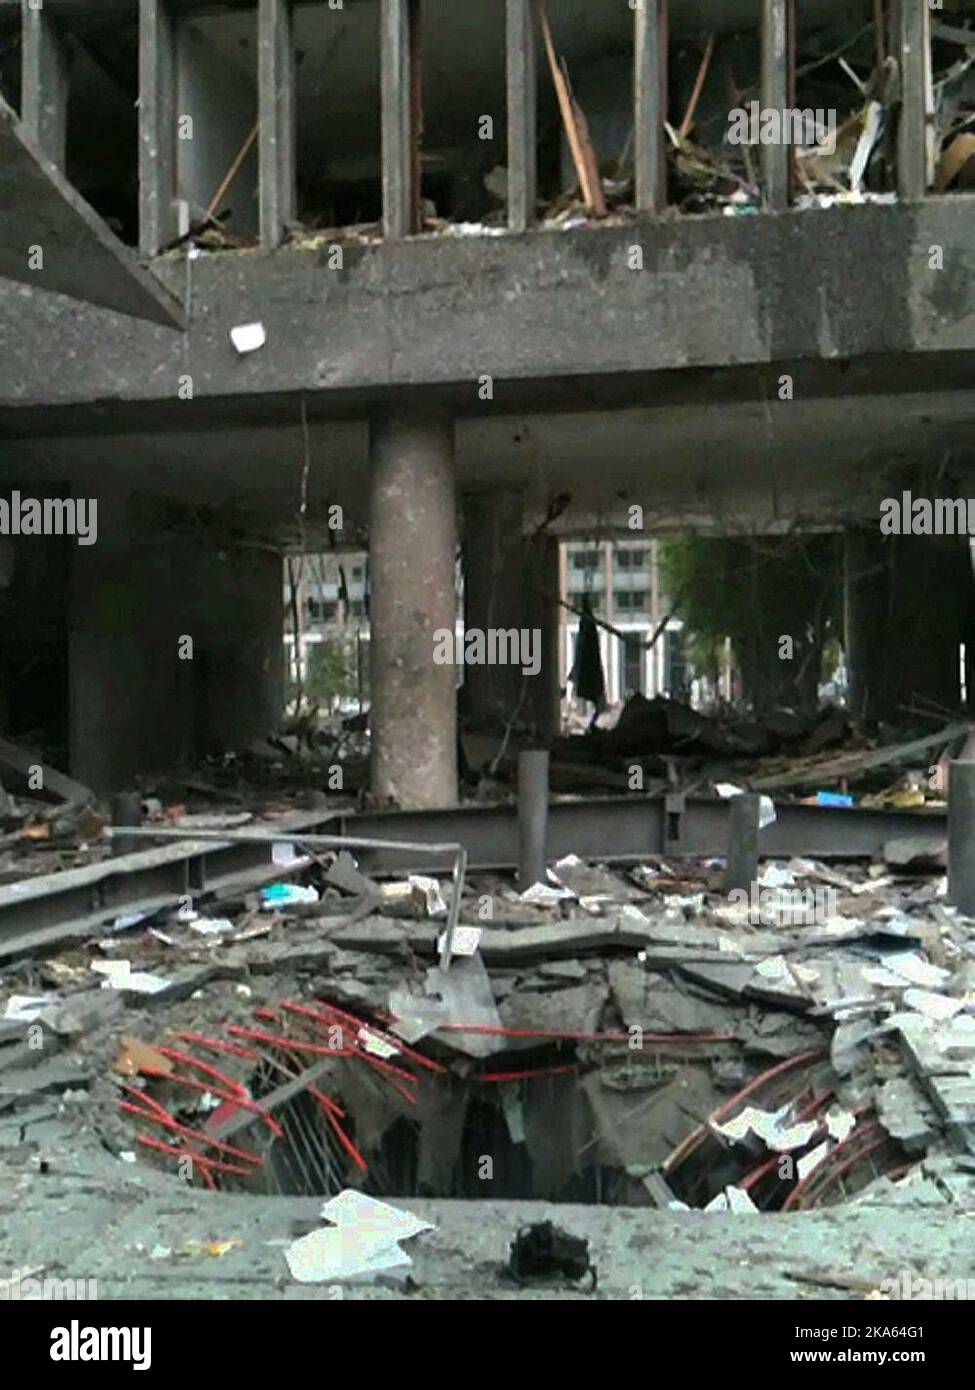 Screen grab from a video showing the crater / hole in the ground under the car with the bomb that exploded outside the high-rise building in the government building on Friday. The picture shows the situation just minutes after the explosion. Stock Photo